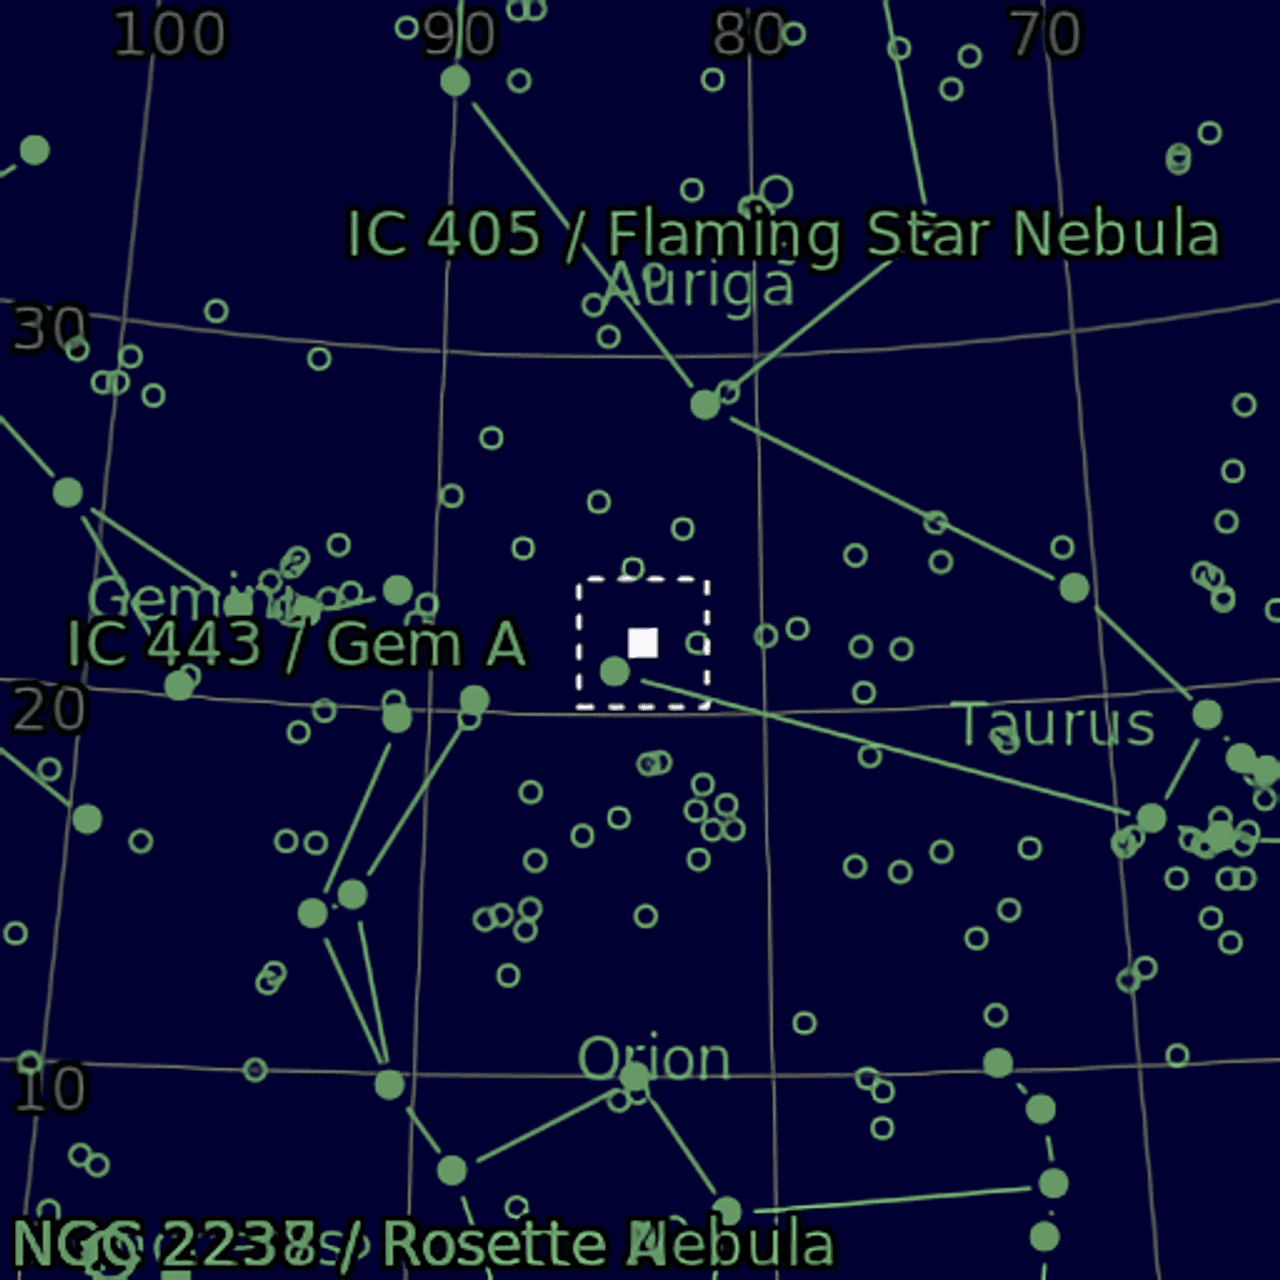 Star map of M1